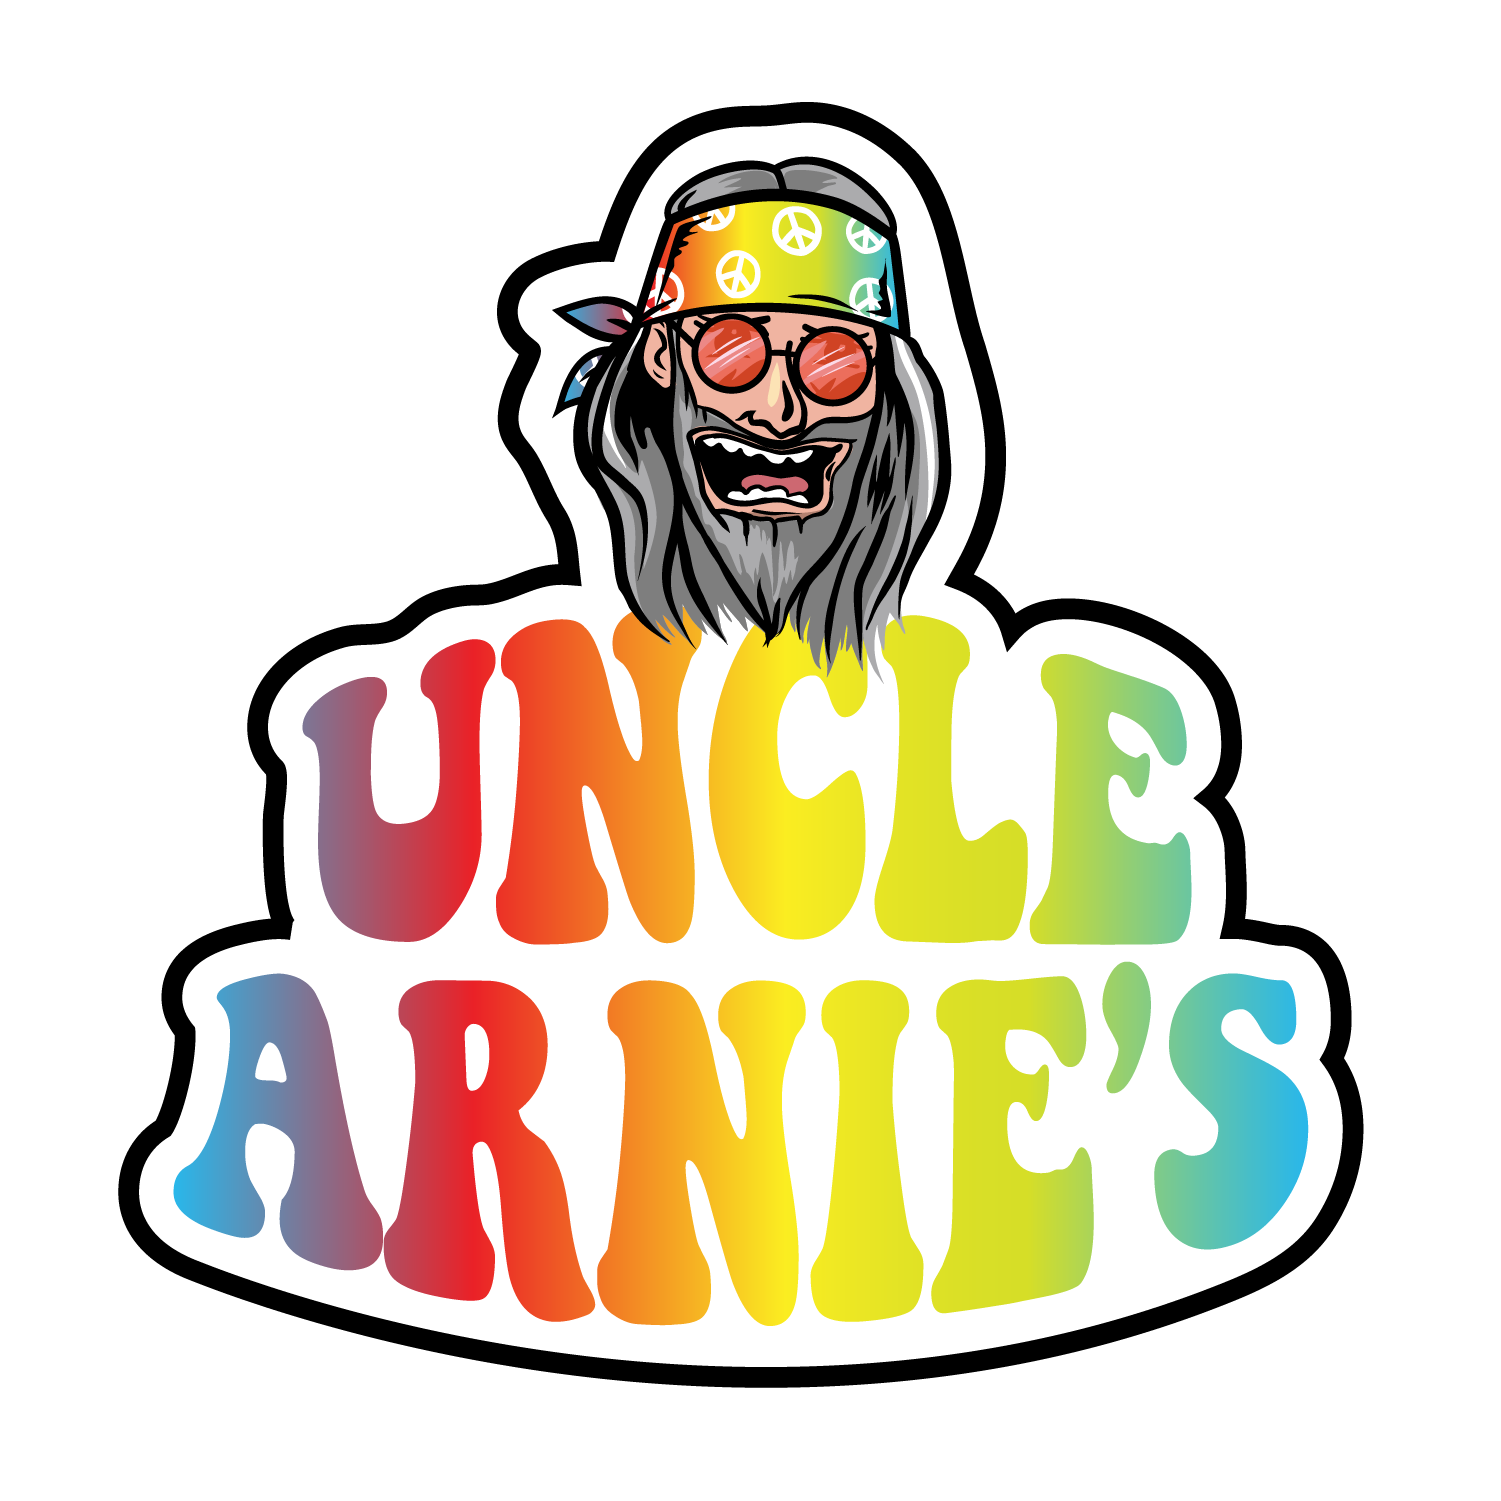 The logo of Uncle Arnie's